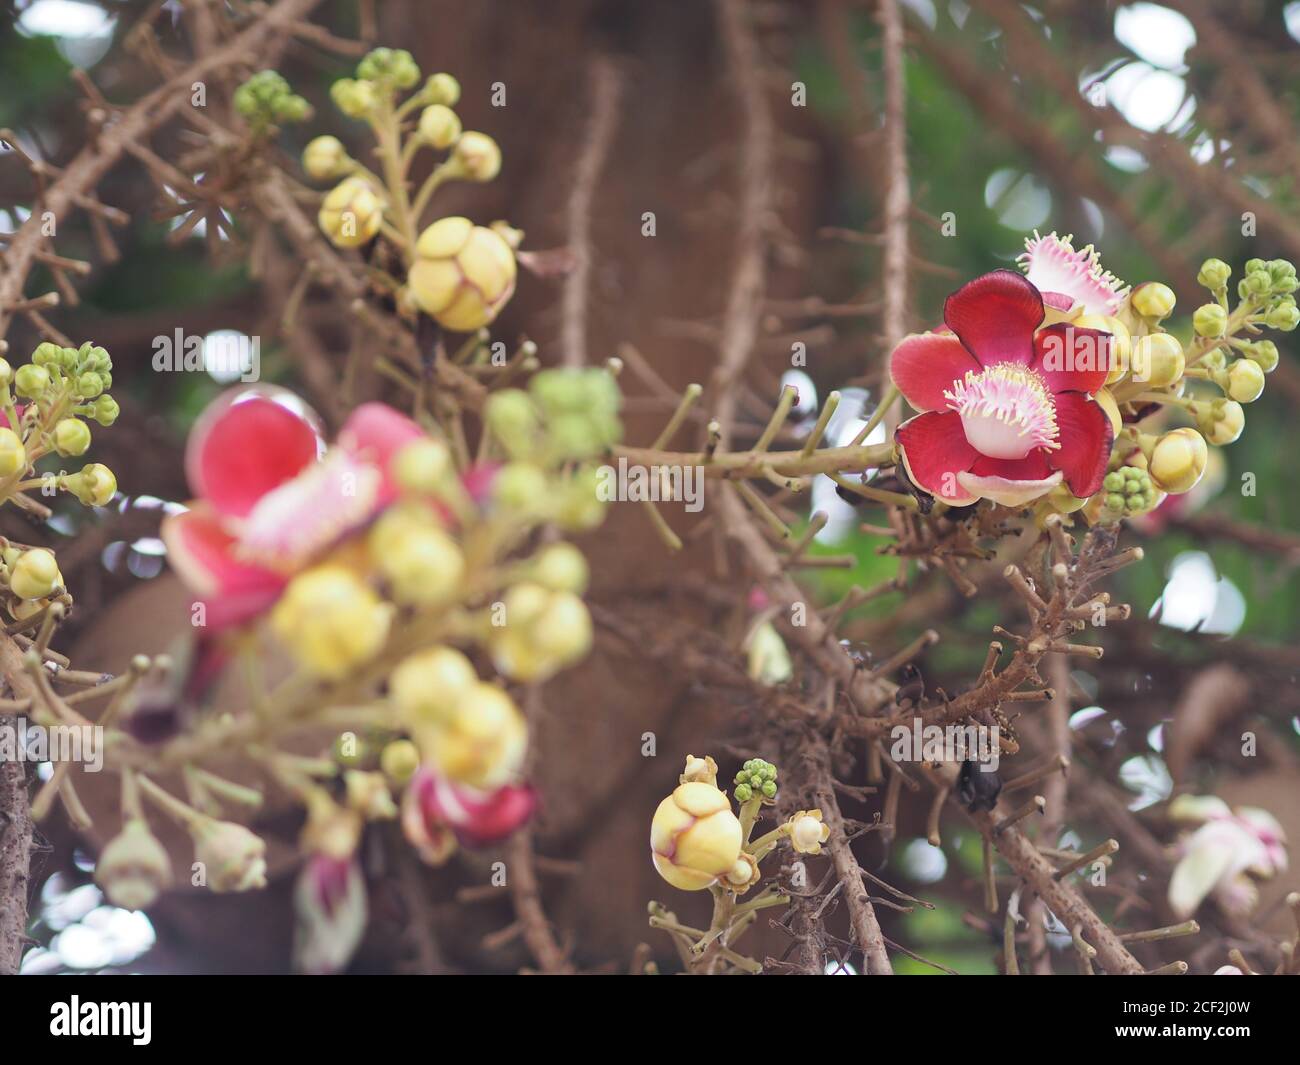 Shorea robusta, Dipterocarpaceae, Couroupita guianensis Aubl., Sal blooming in garden on blurred nature background Stock Photo